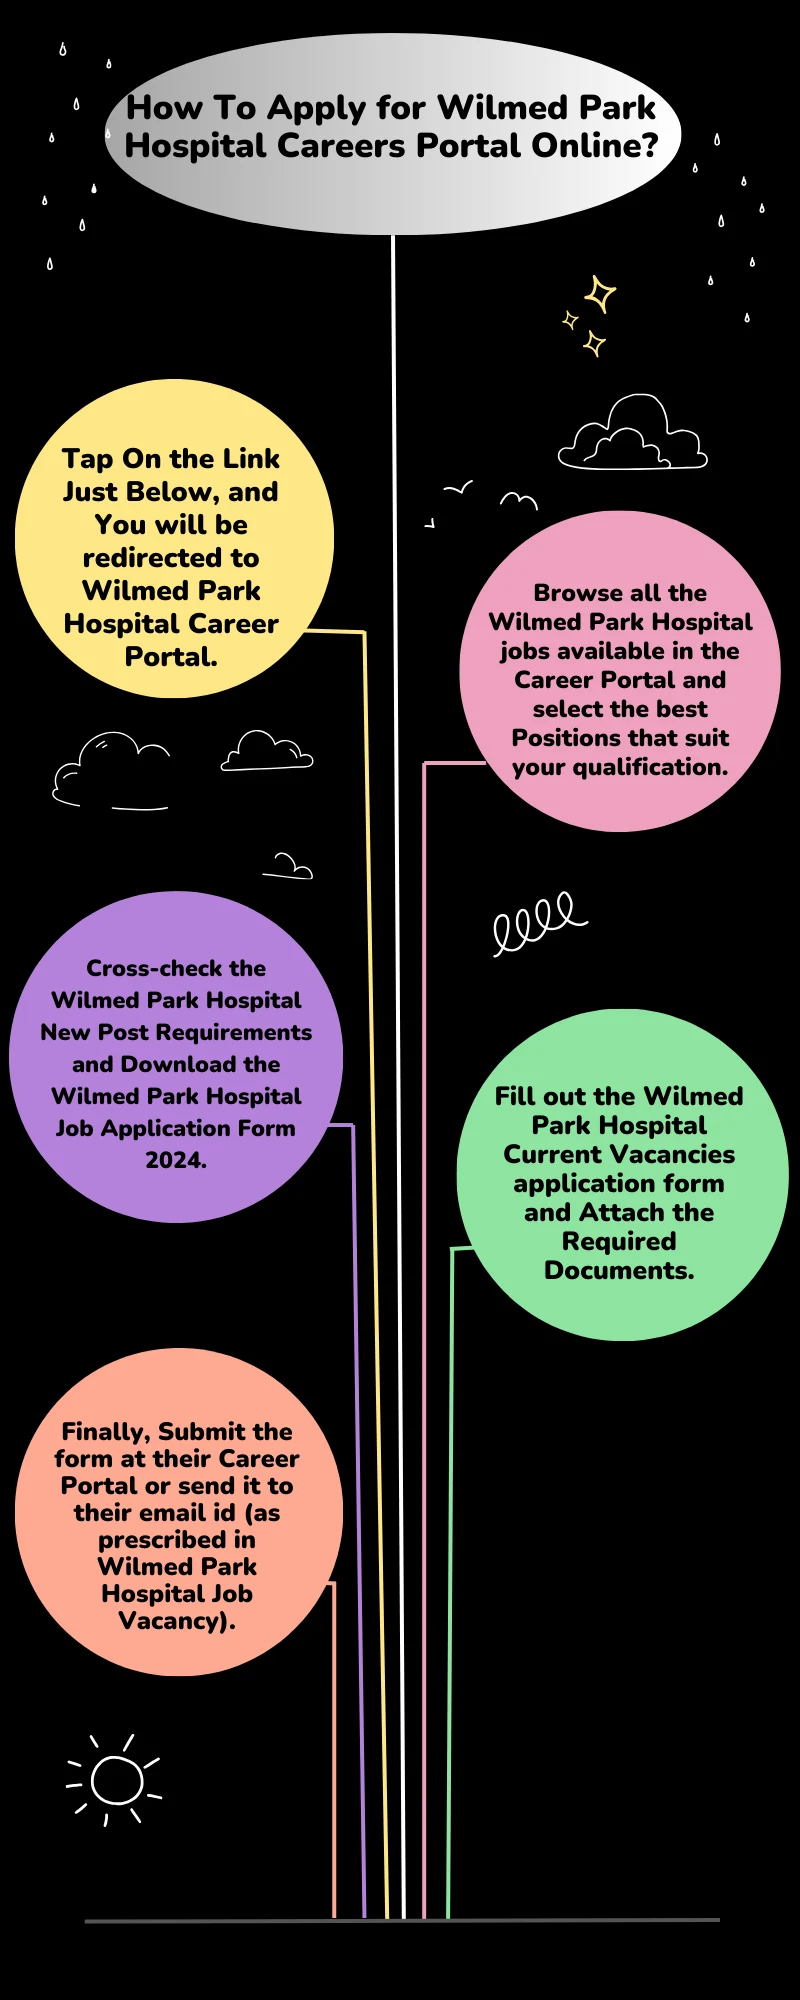 How To Apply for Wilmed Park Hospital Careers Portal Online?